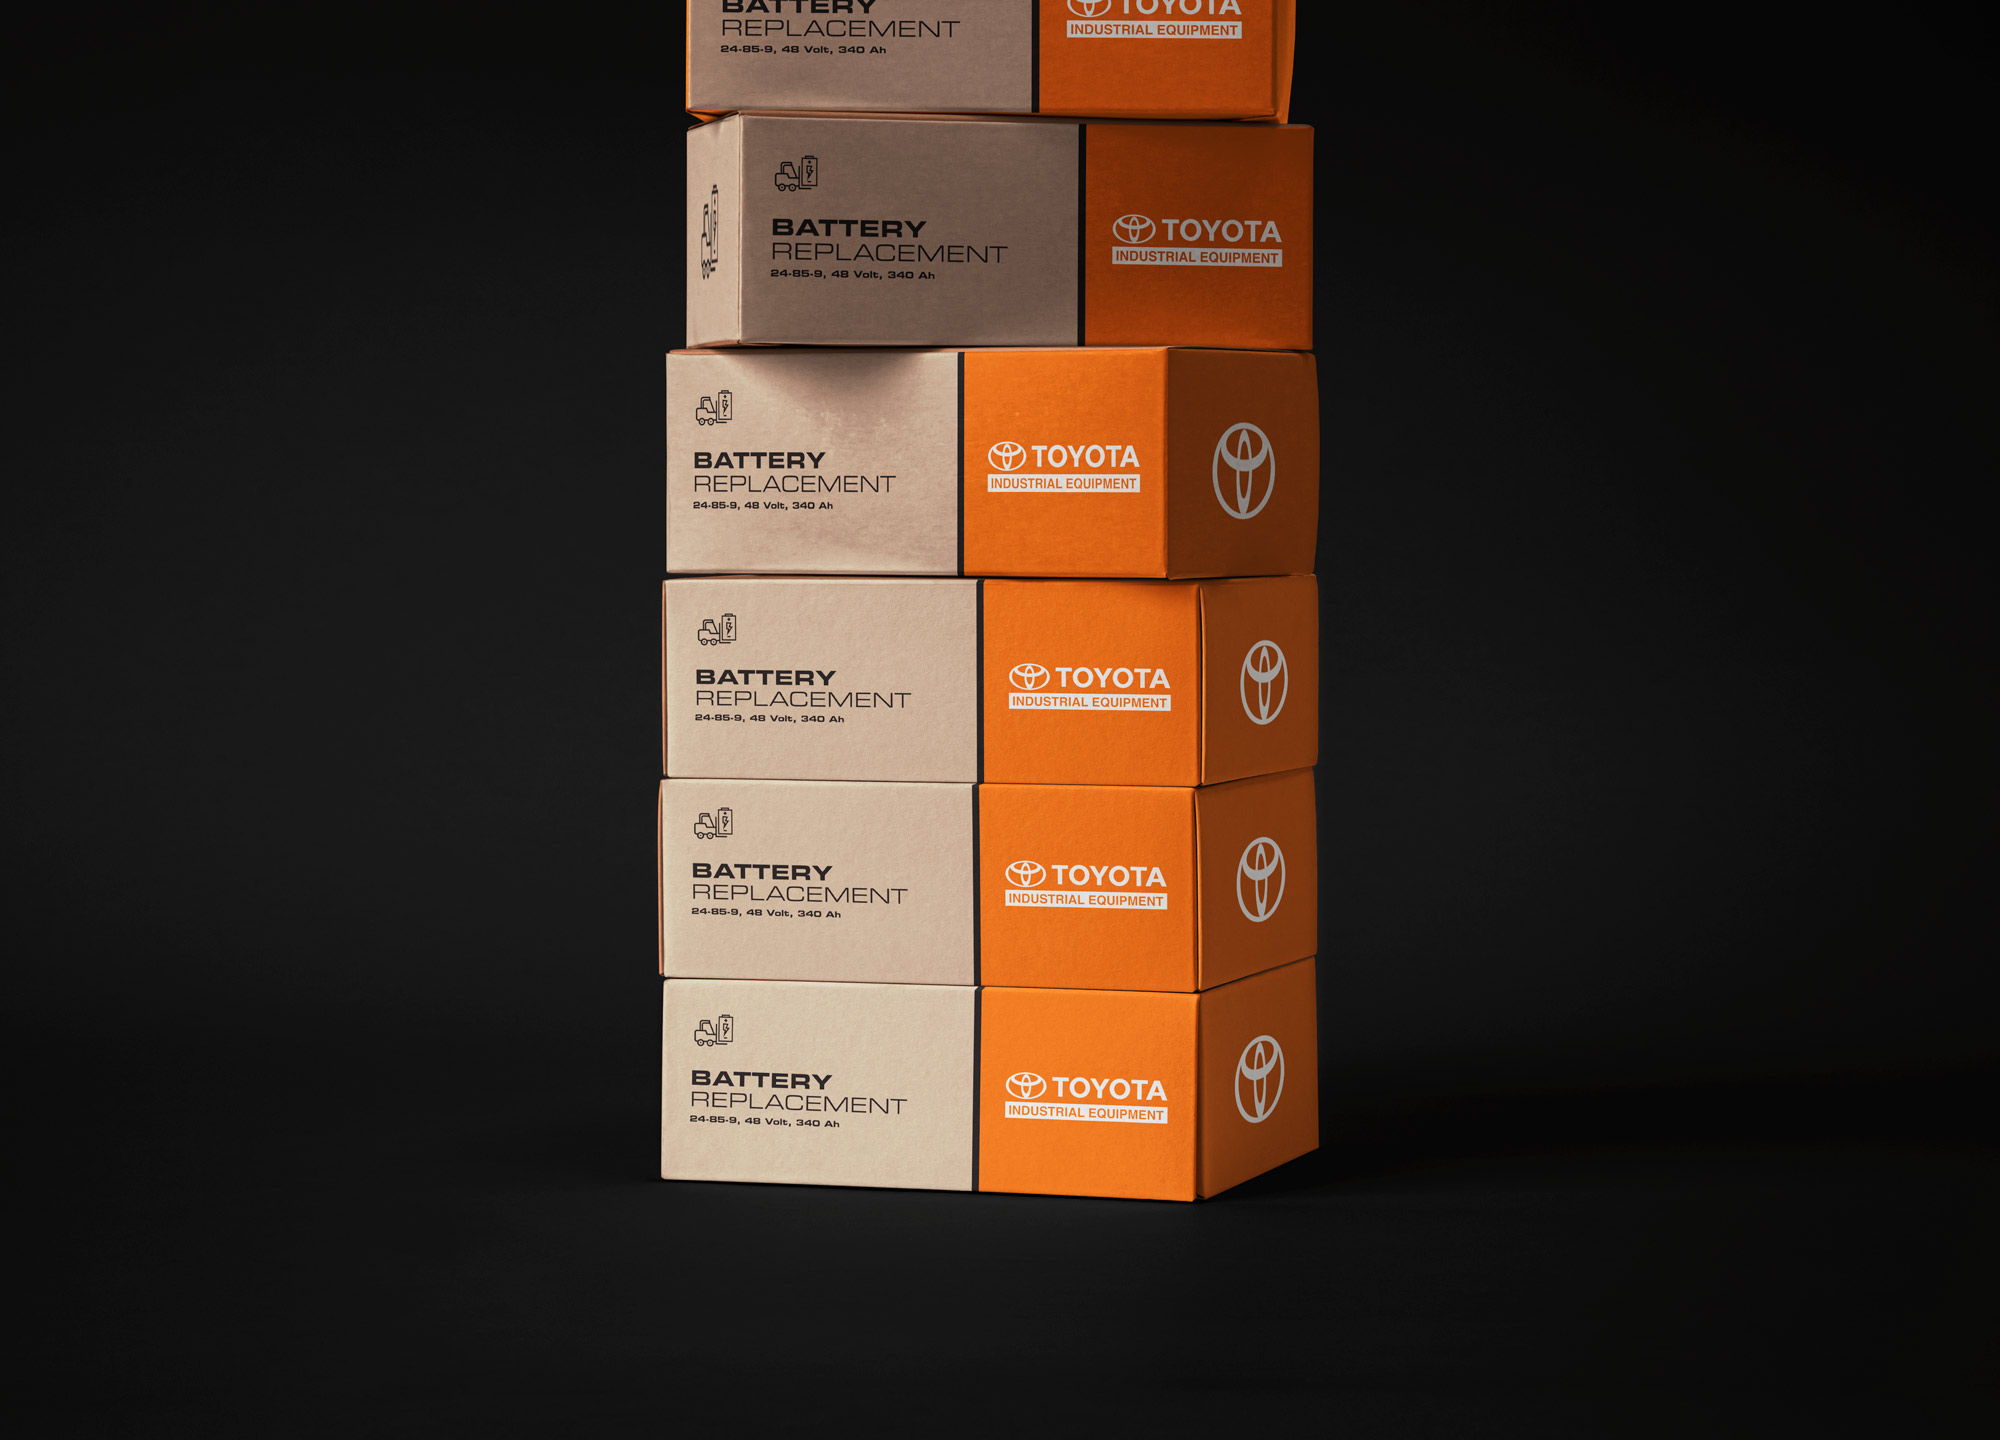 Packaging design of battery replacement boxes for a manufacturing company.